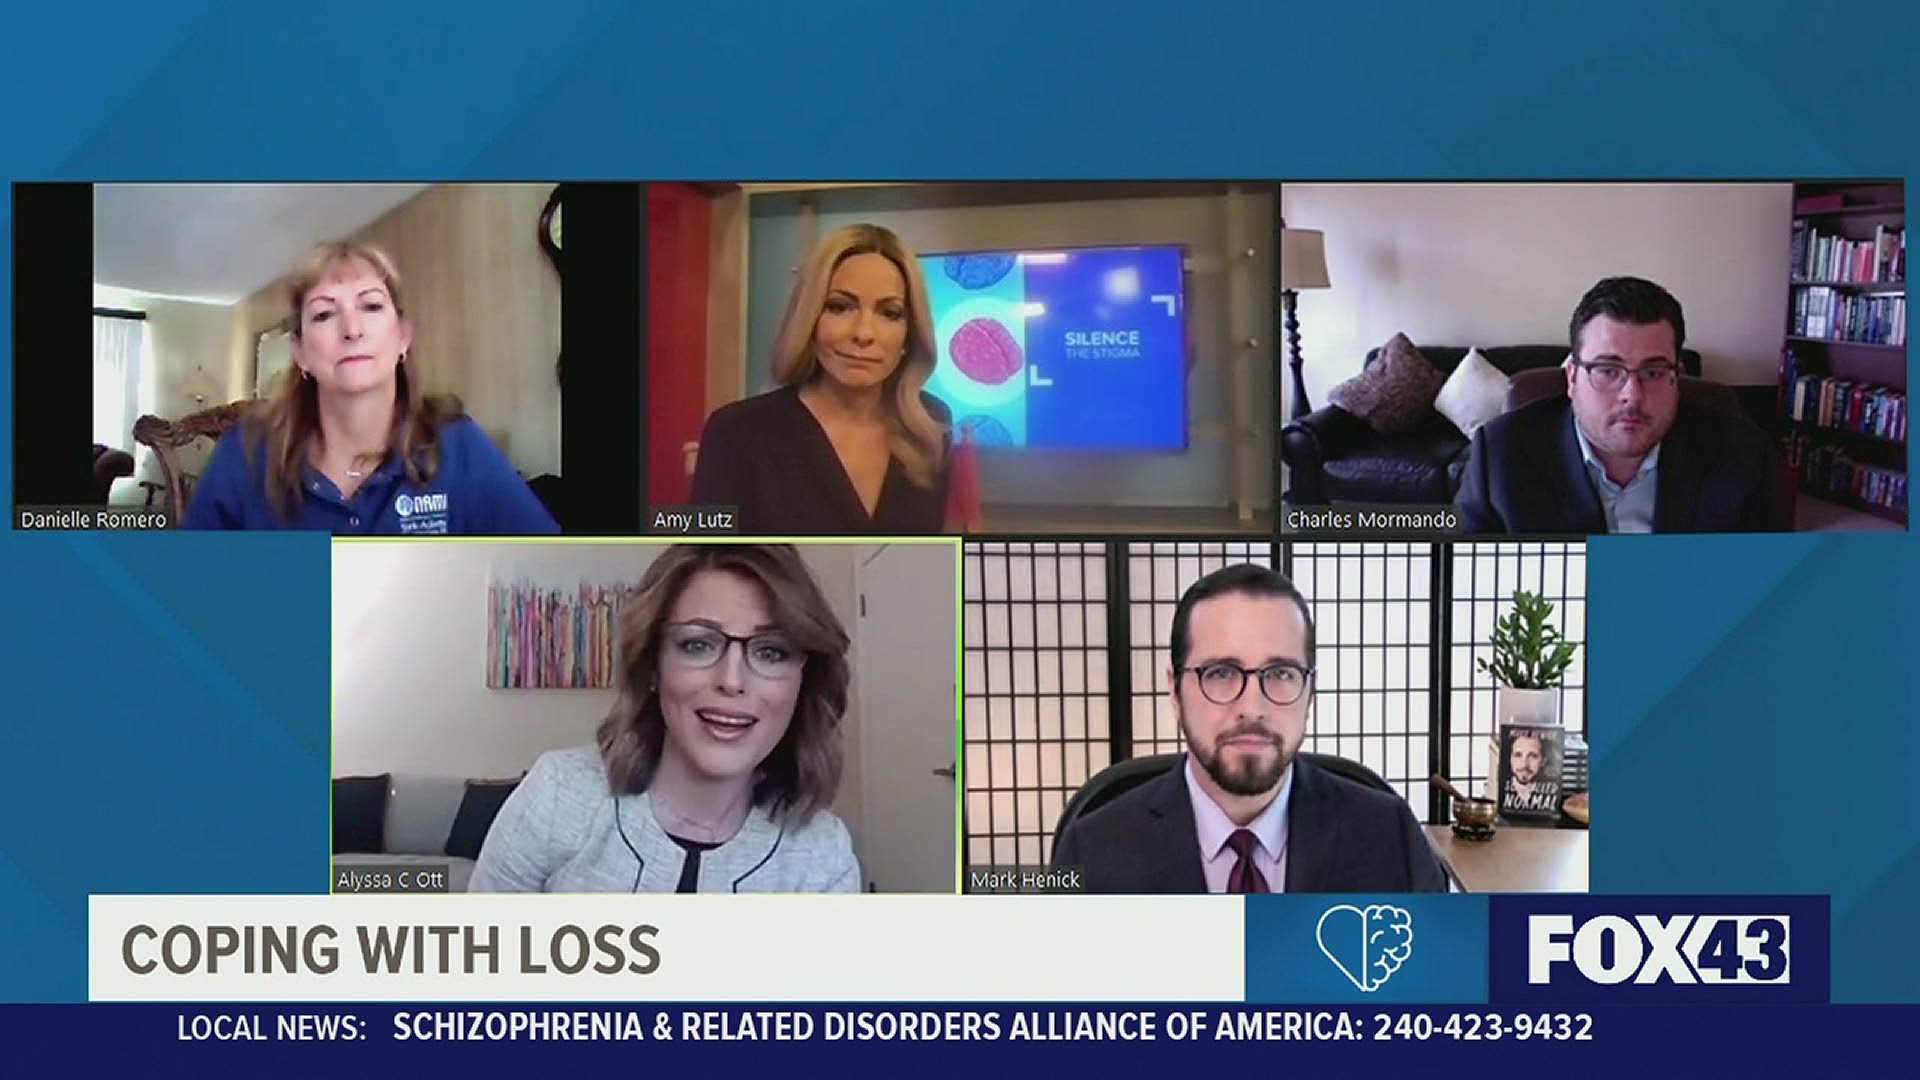 We talked with four experts openly on a variety of topics, including shortages in mental health care, addiction, grief.